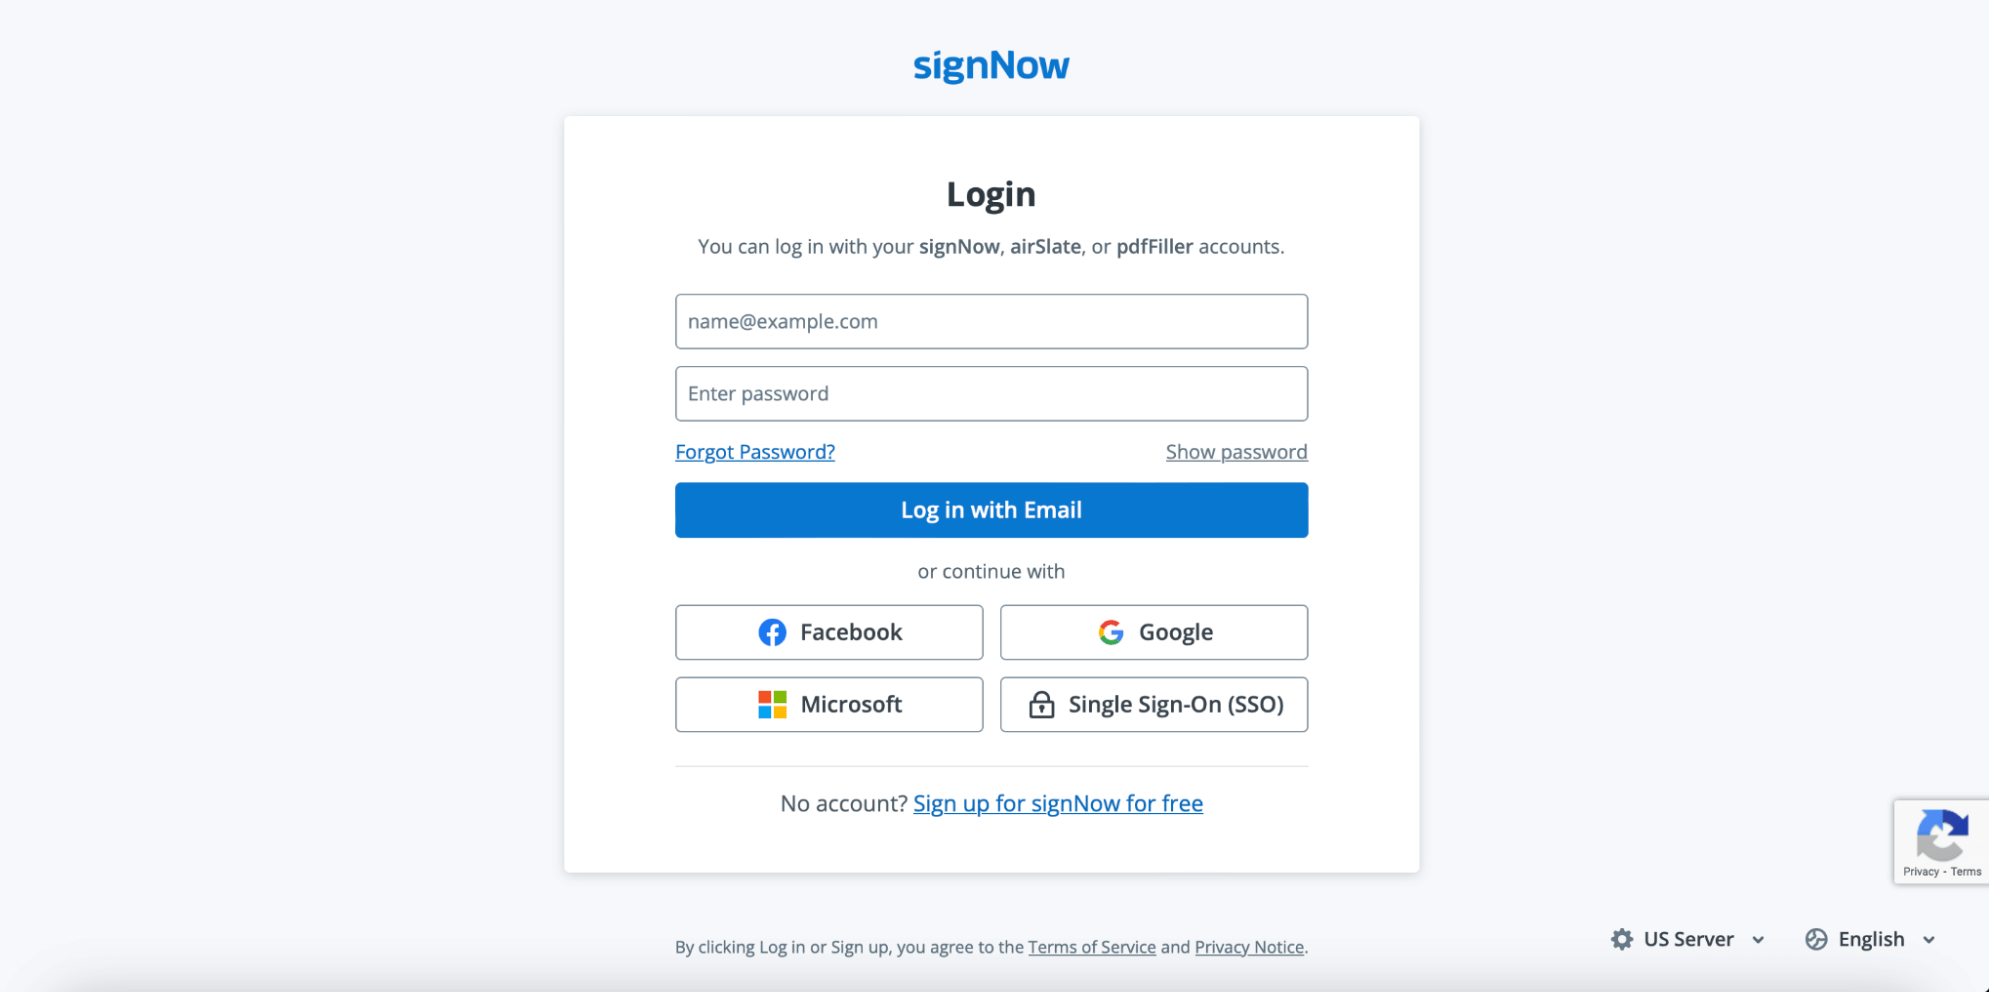 Log in to your SignNow account